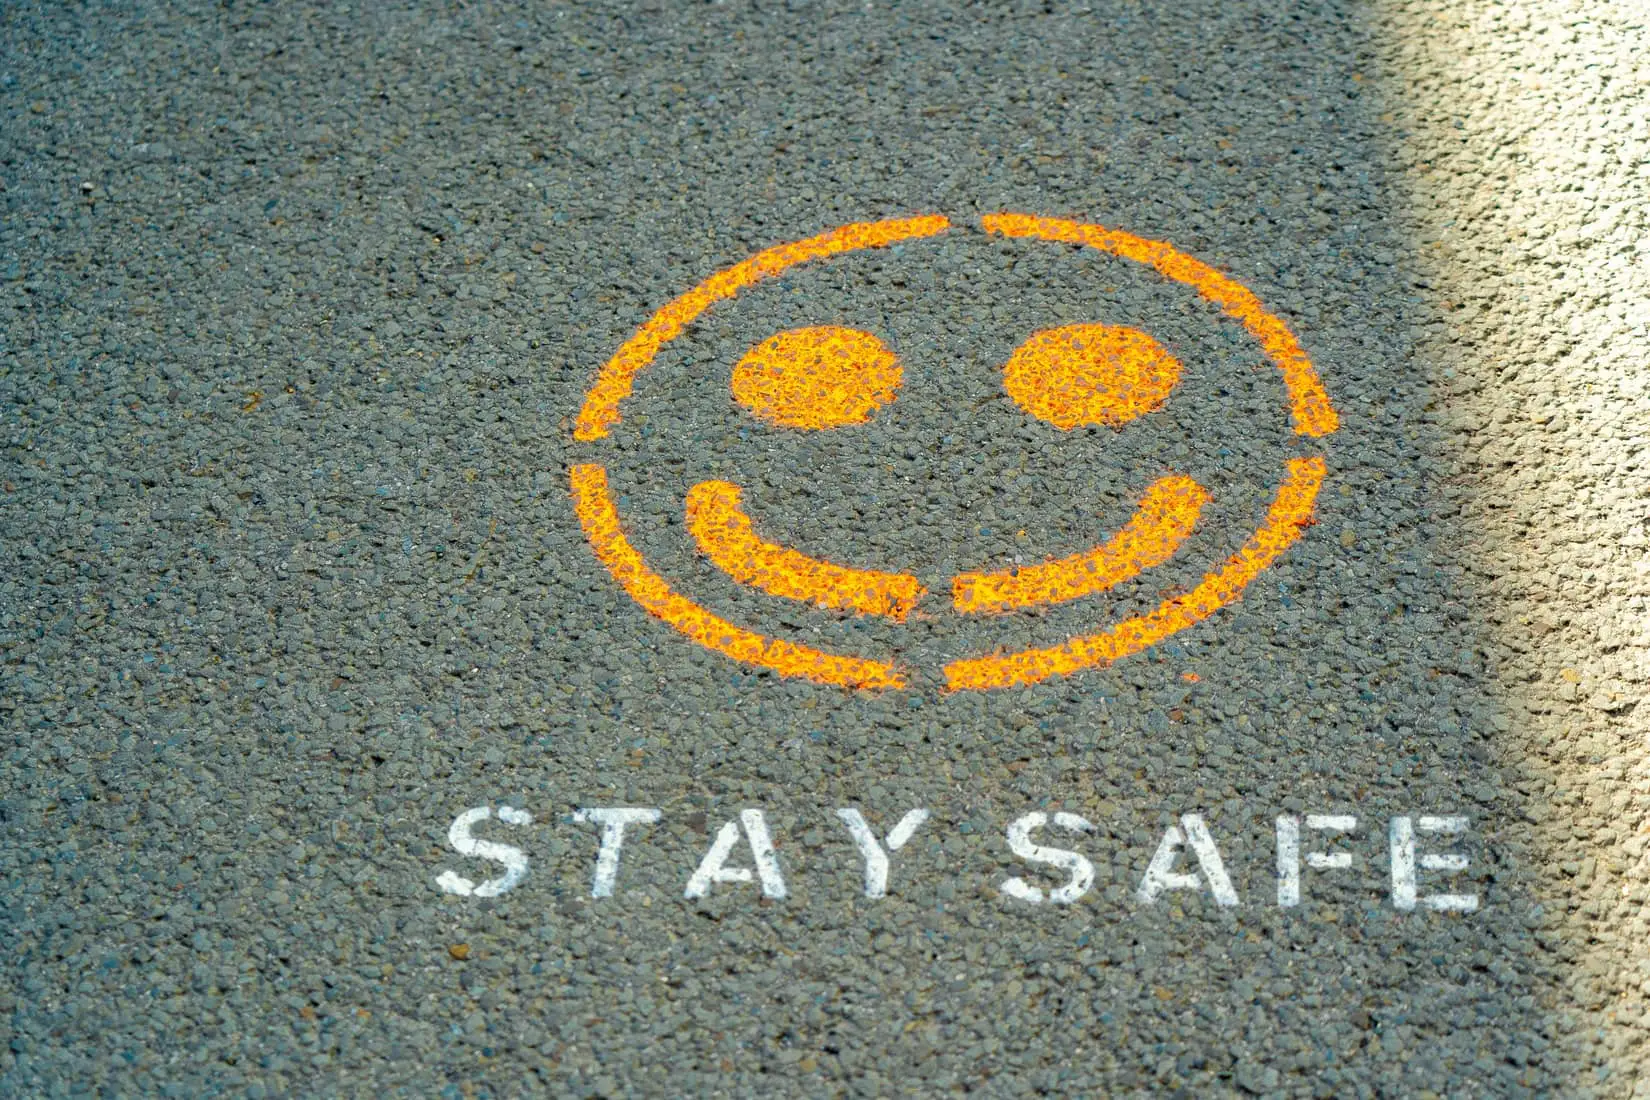 stay safe message on road with a smiley face by Nick Fewings